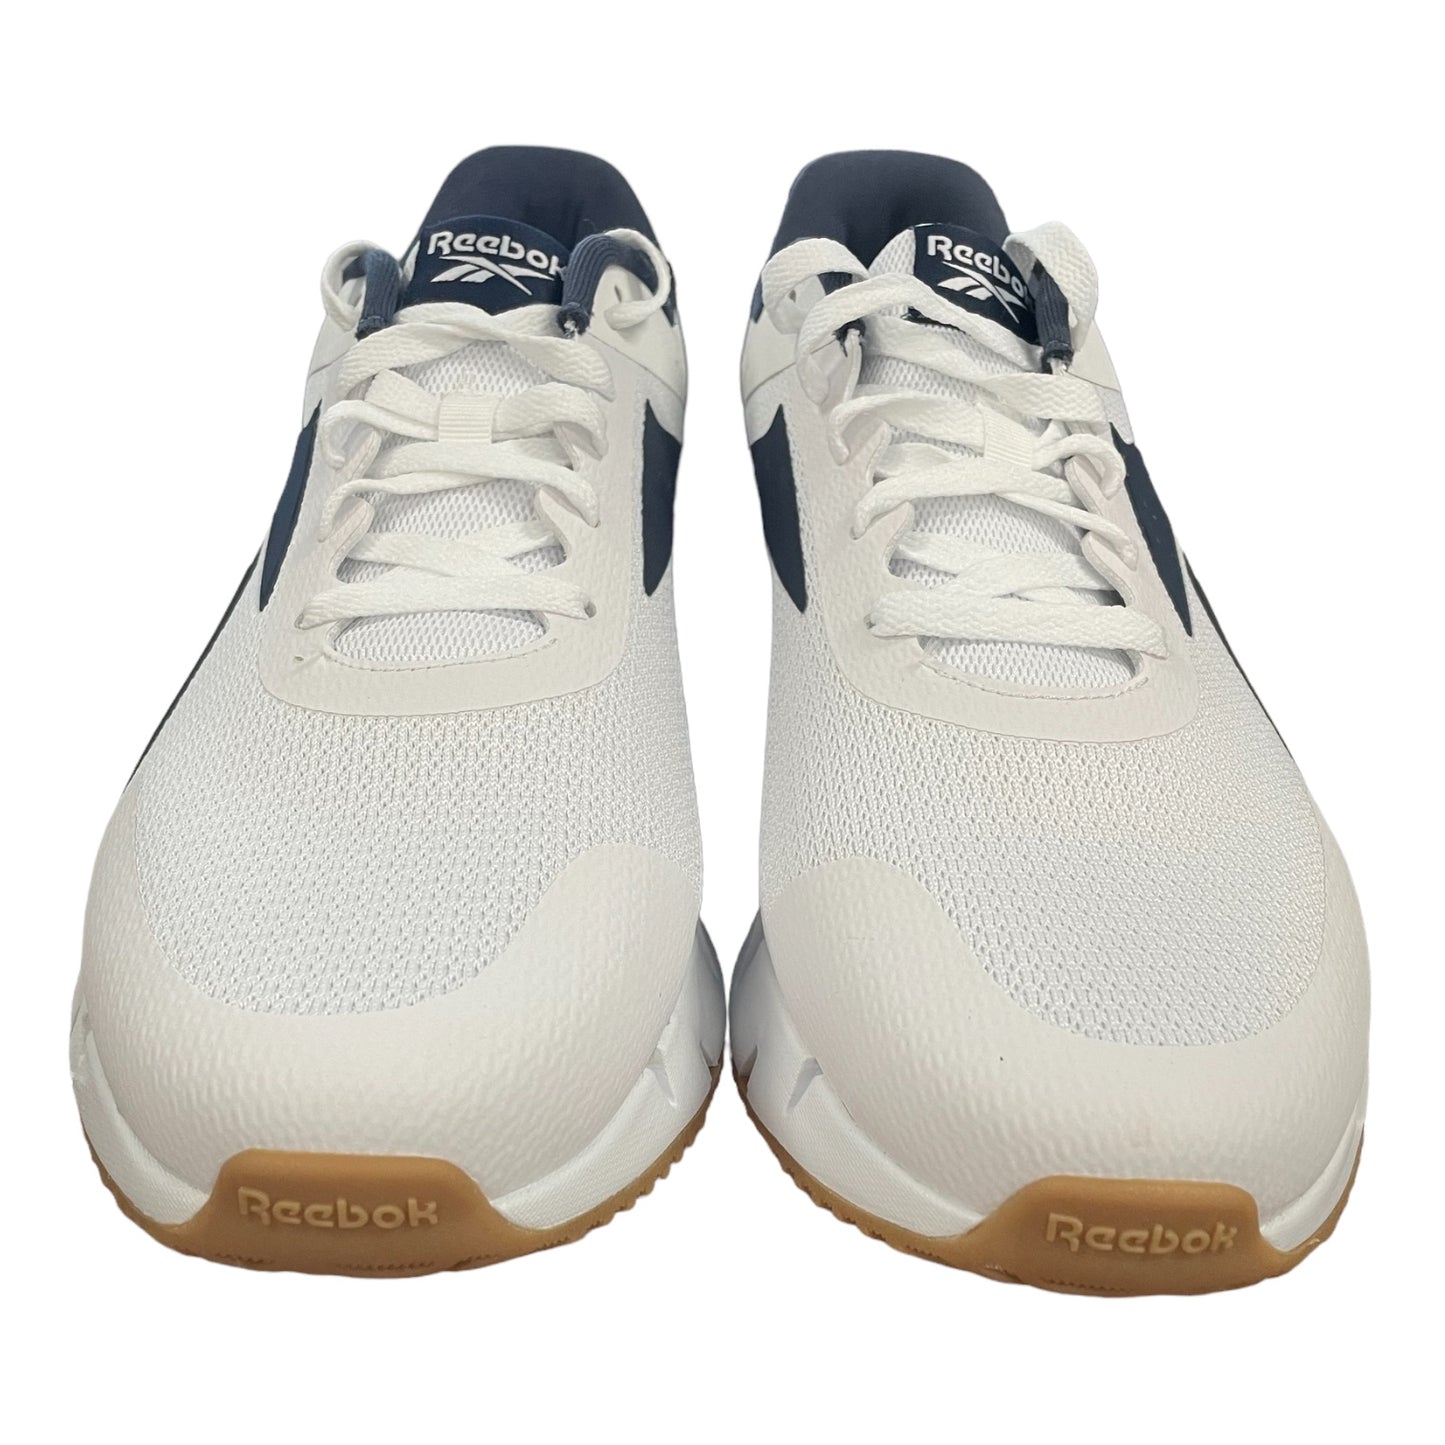 Reebok Men's Zig Dynamica 2.0 CL Lace Up Running Shoes